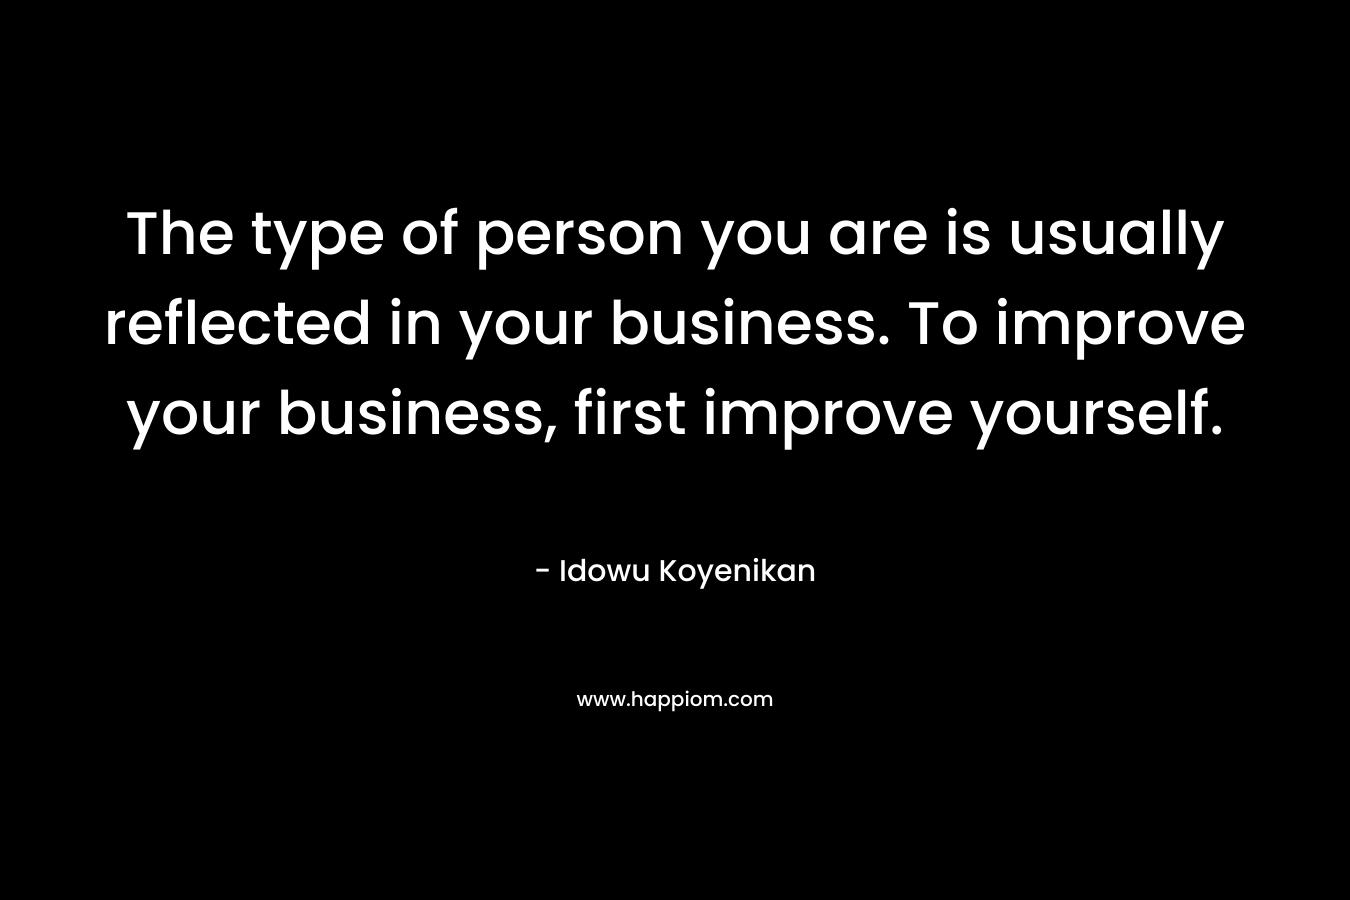 The type of person you are is usually reflected in your business. To improve your business, first improve yourself.